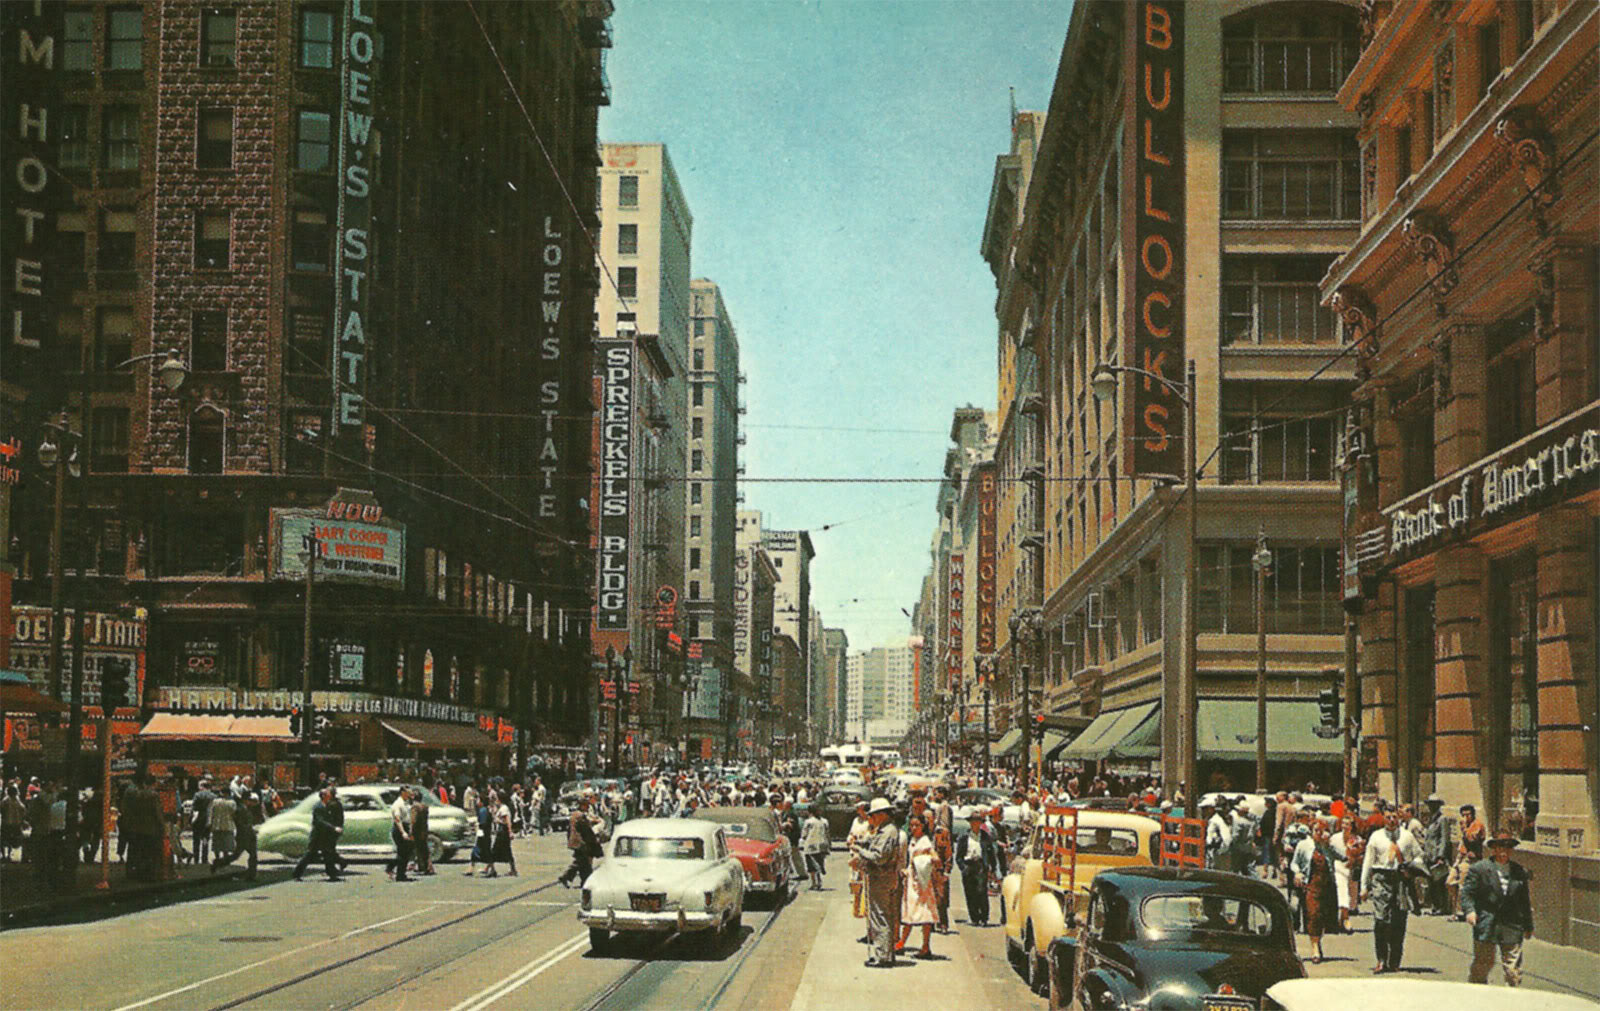 Seventh and Broadway, 1950s